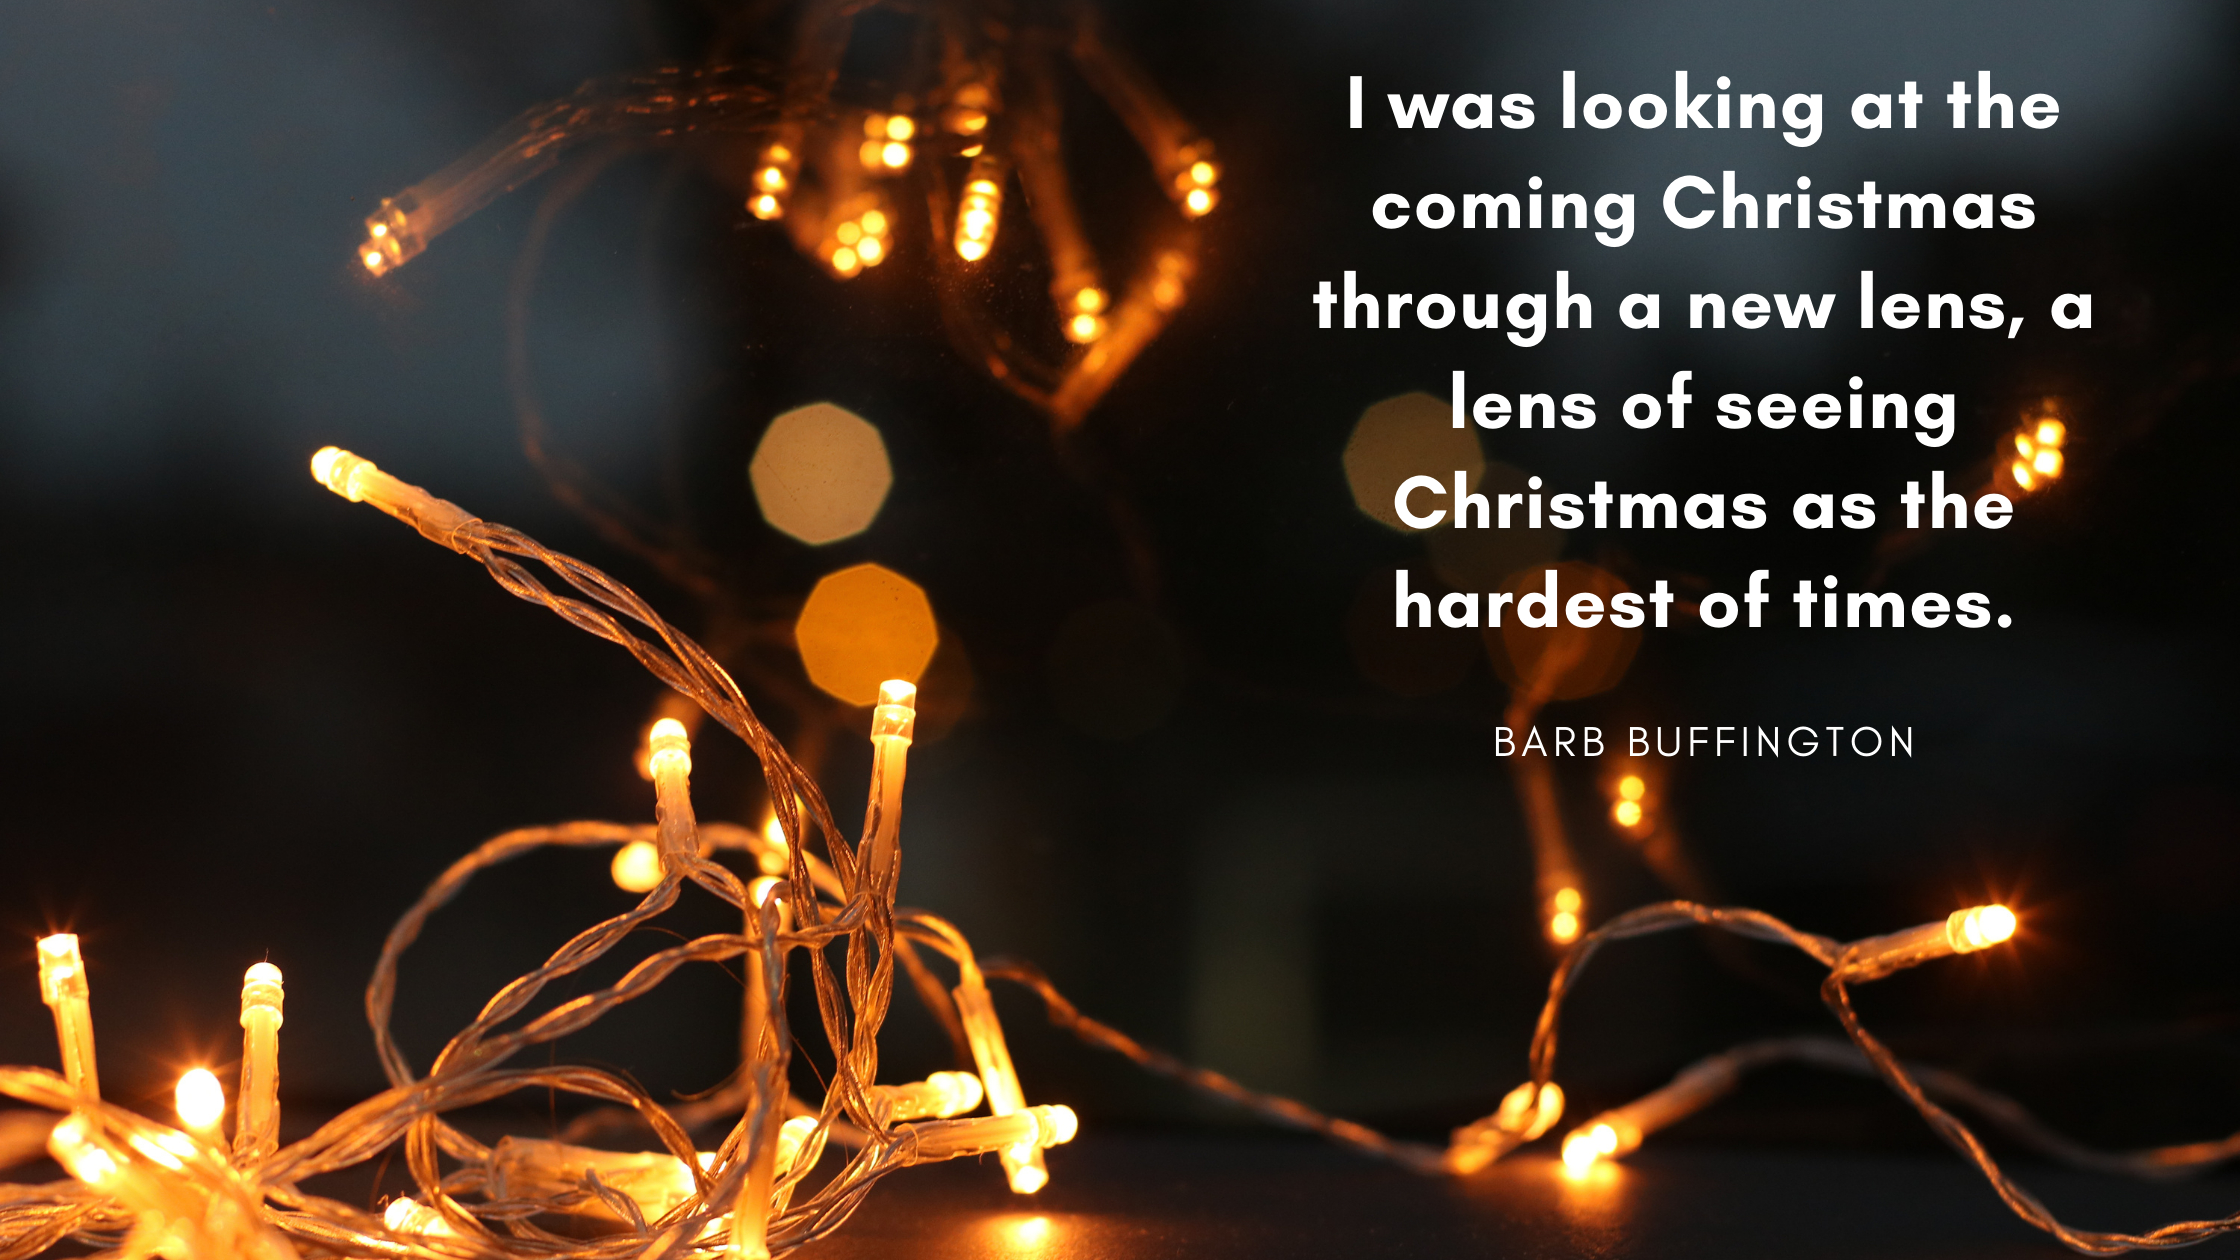 I was looking at the coming Christmas through a new lens, a lens of seeing Christmas as the hardest of times.